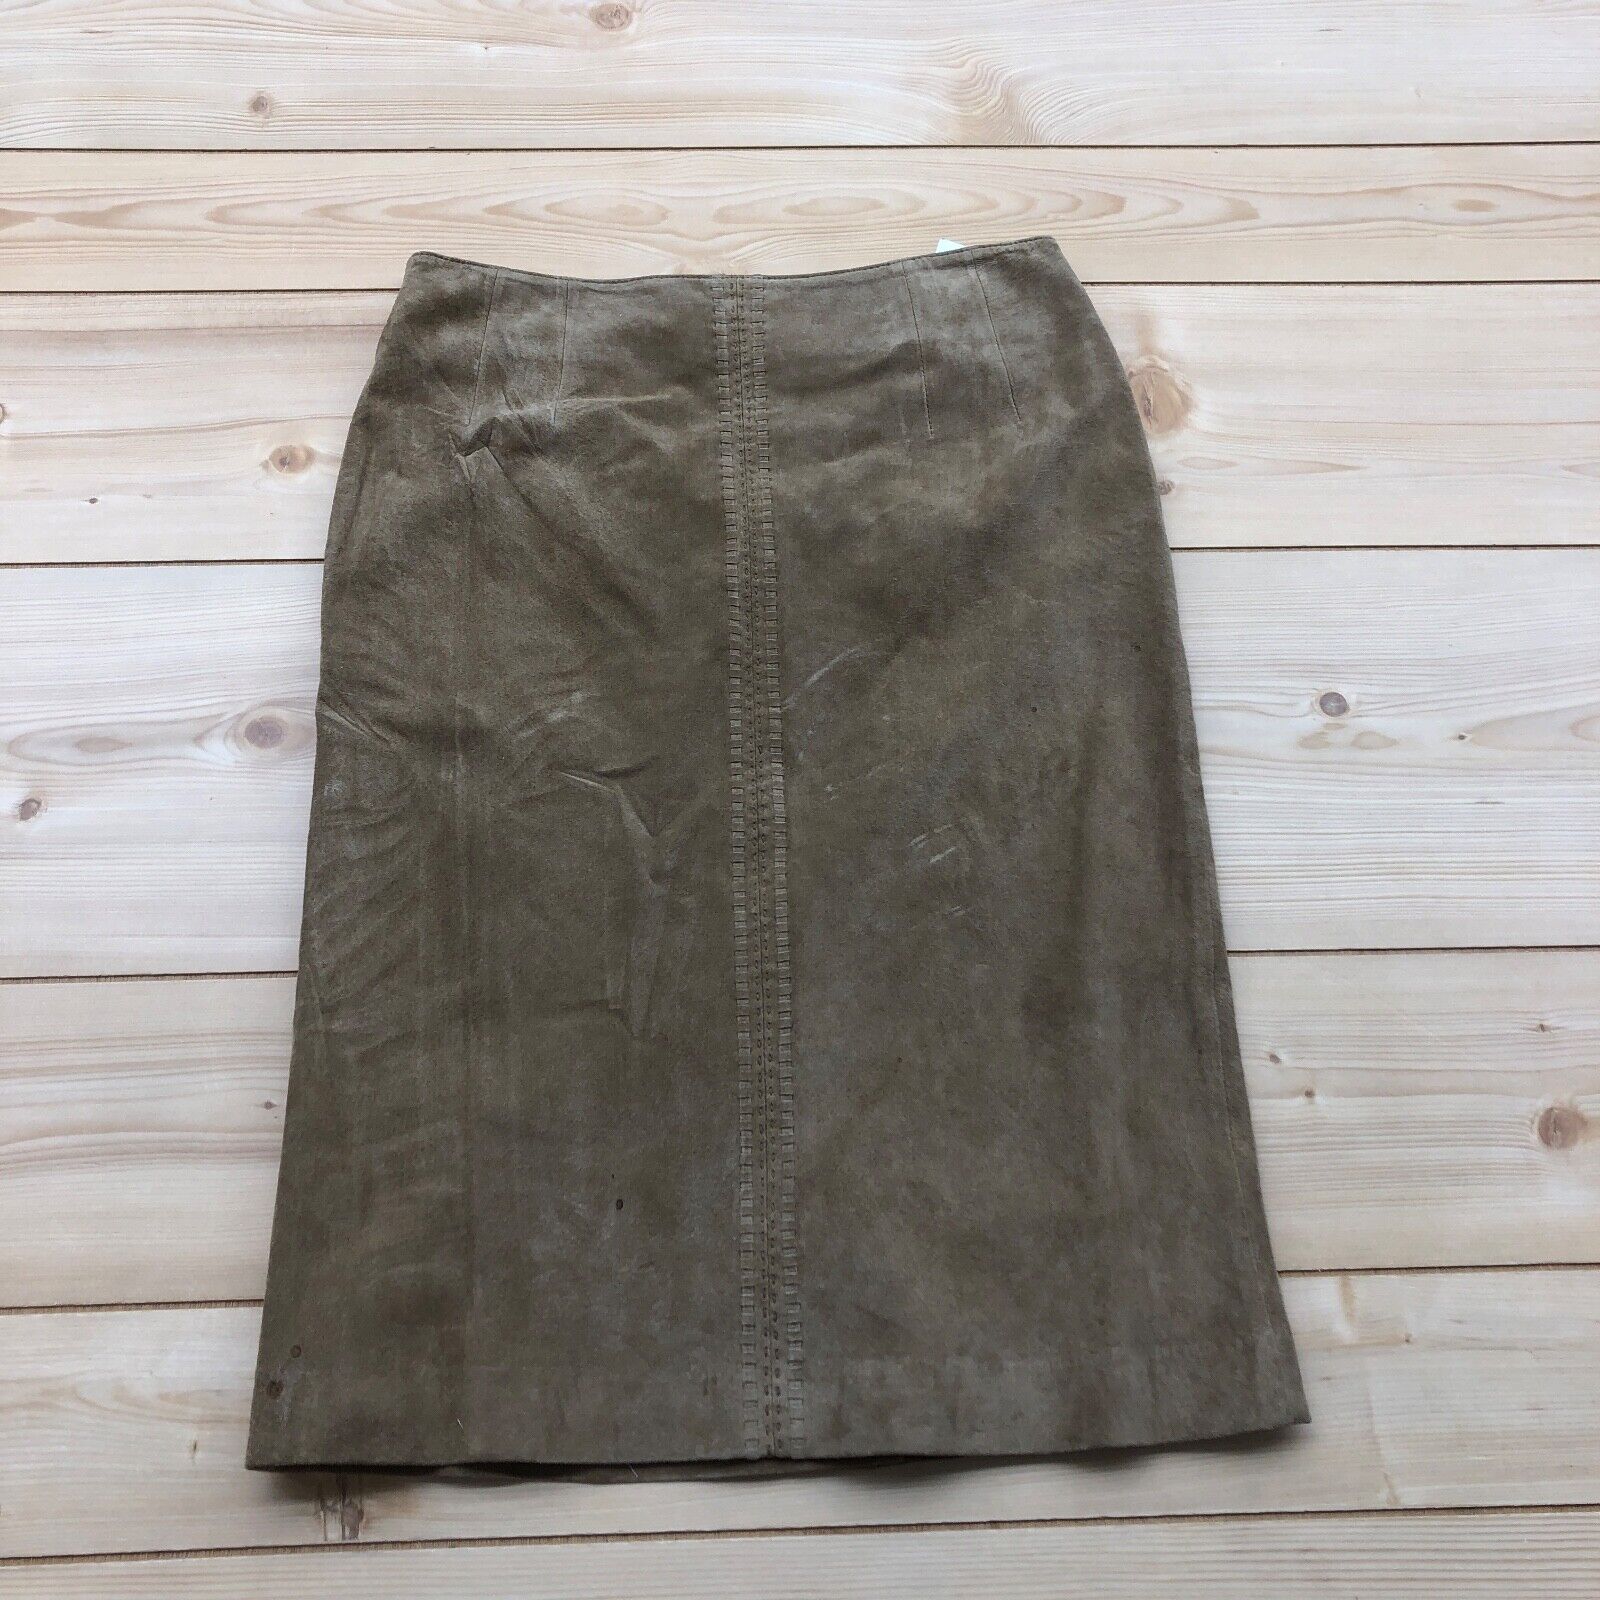 Telluride Clothing Co  Brown Genuine Leather Zip Up Pencil Skirt Women's Size 6